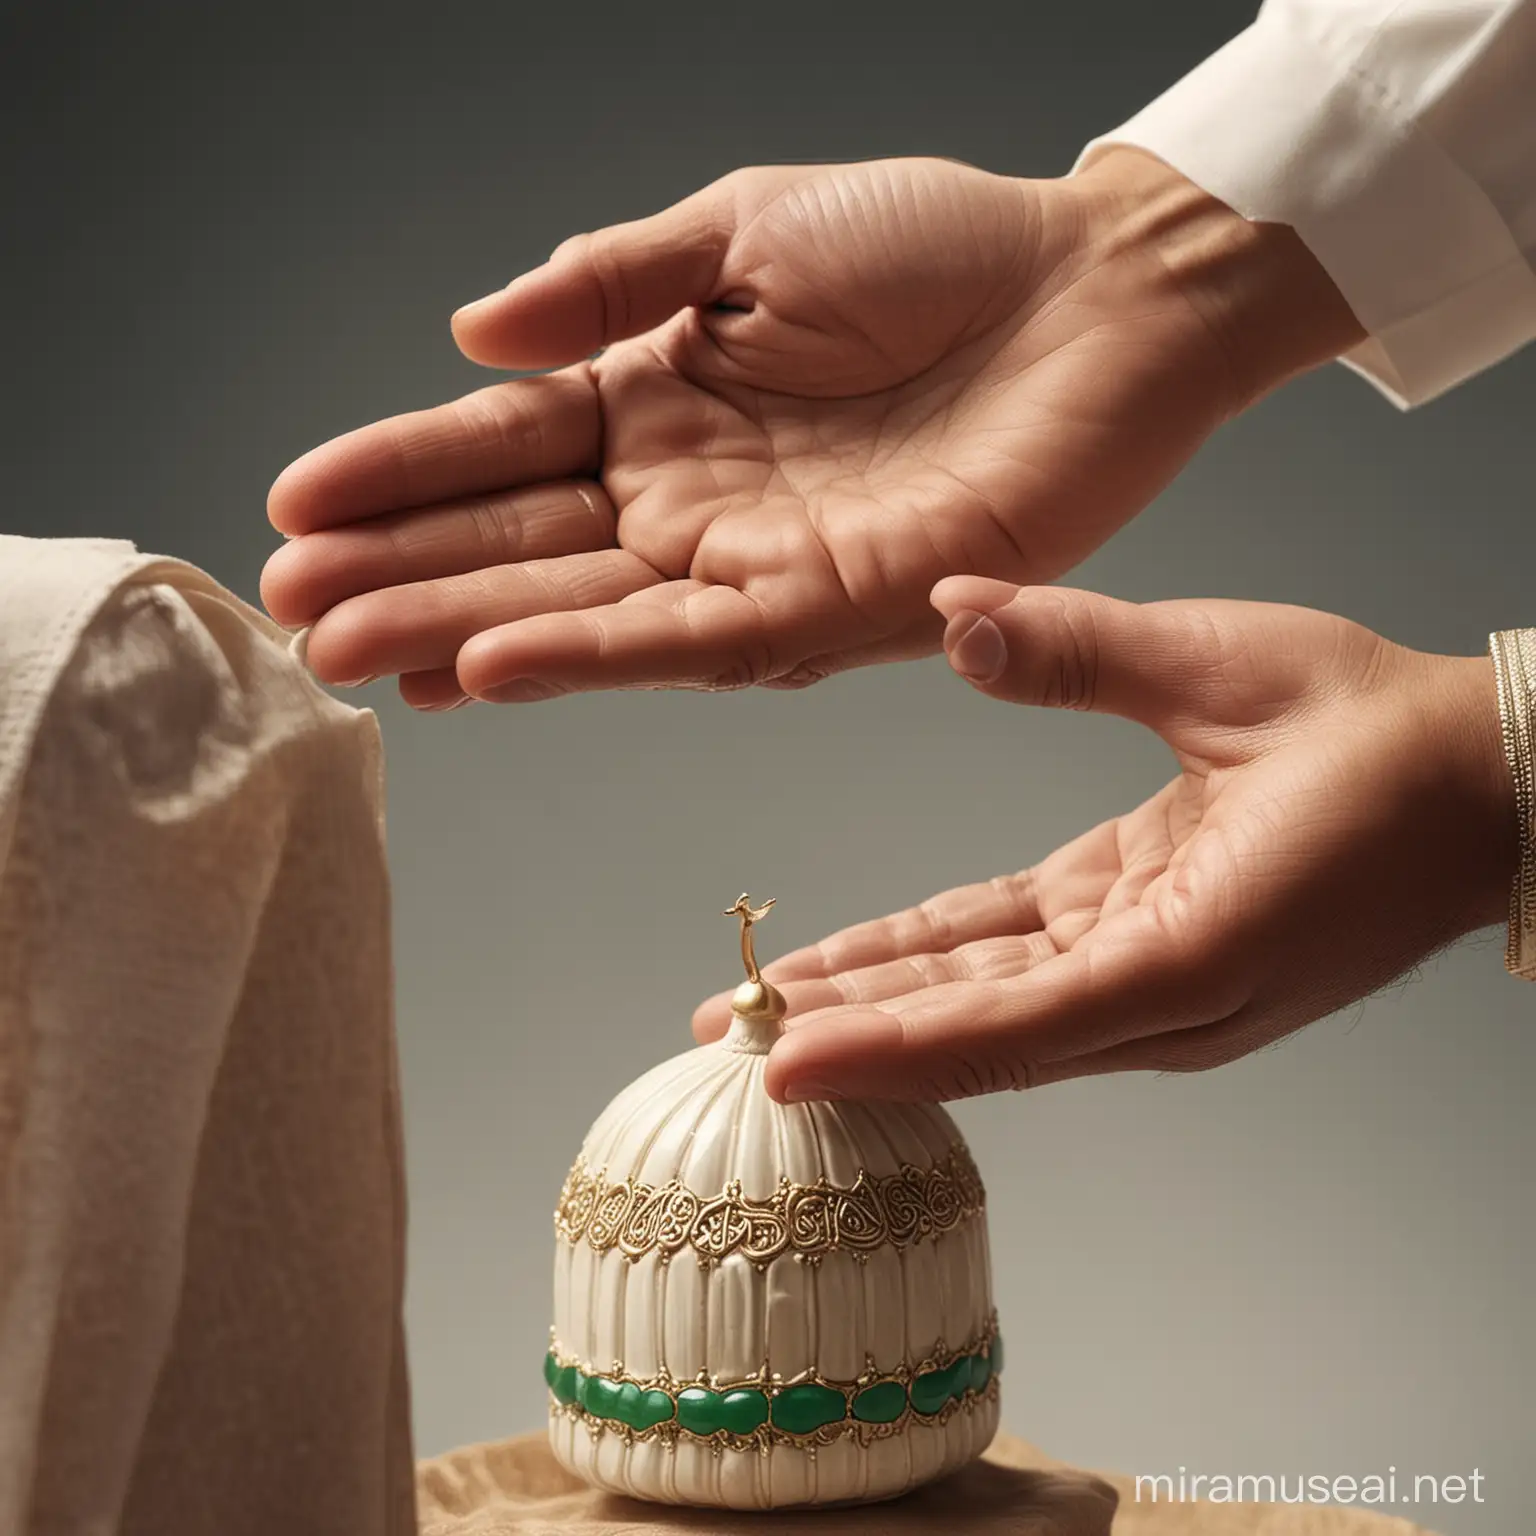 Generate an image of muslim hand putting giving to the needy